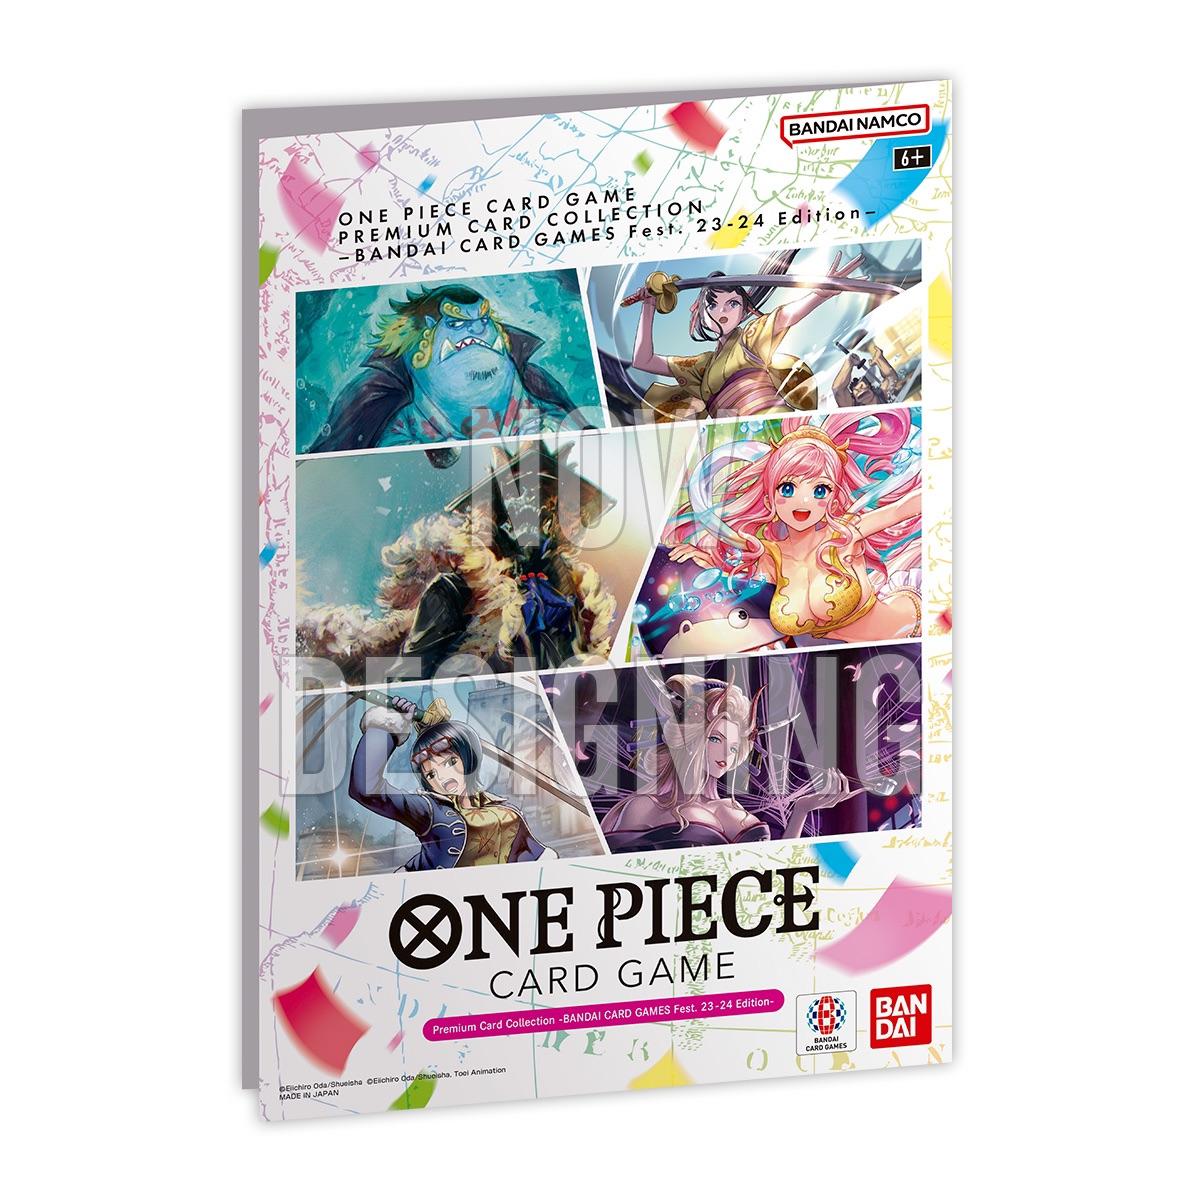 ONE PIECE CARD GAME Premium Card Collection -Festival Edition-